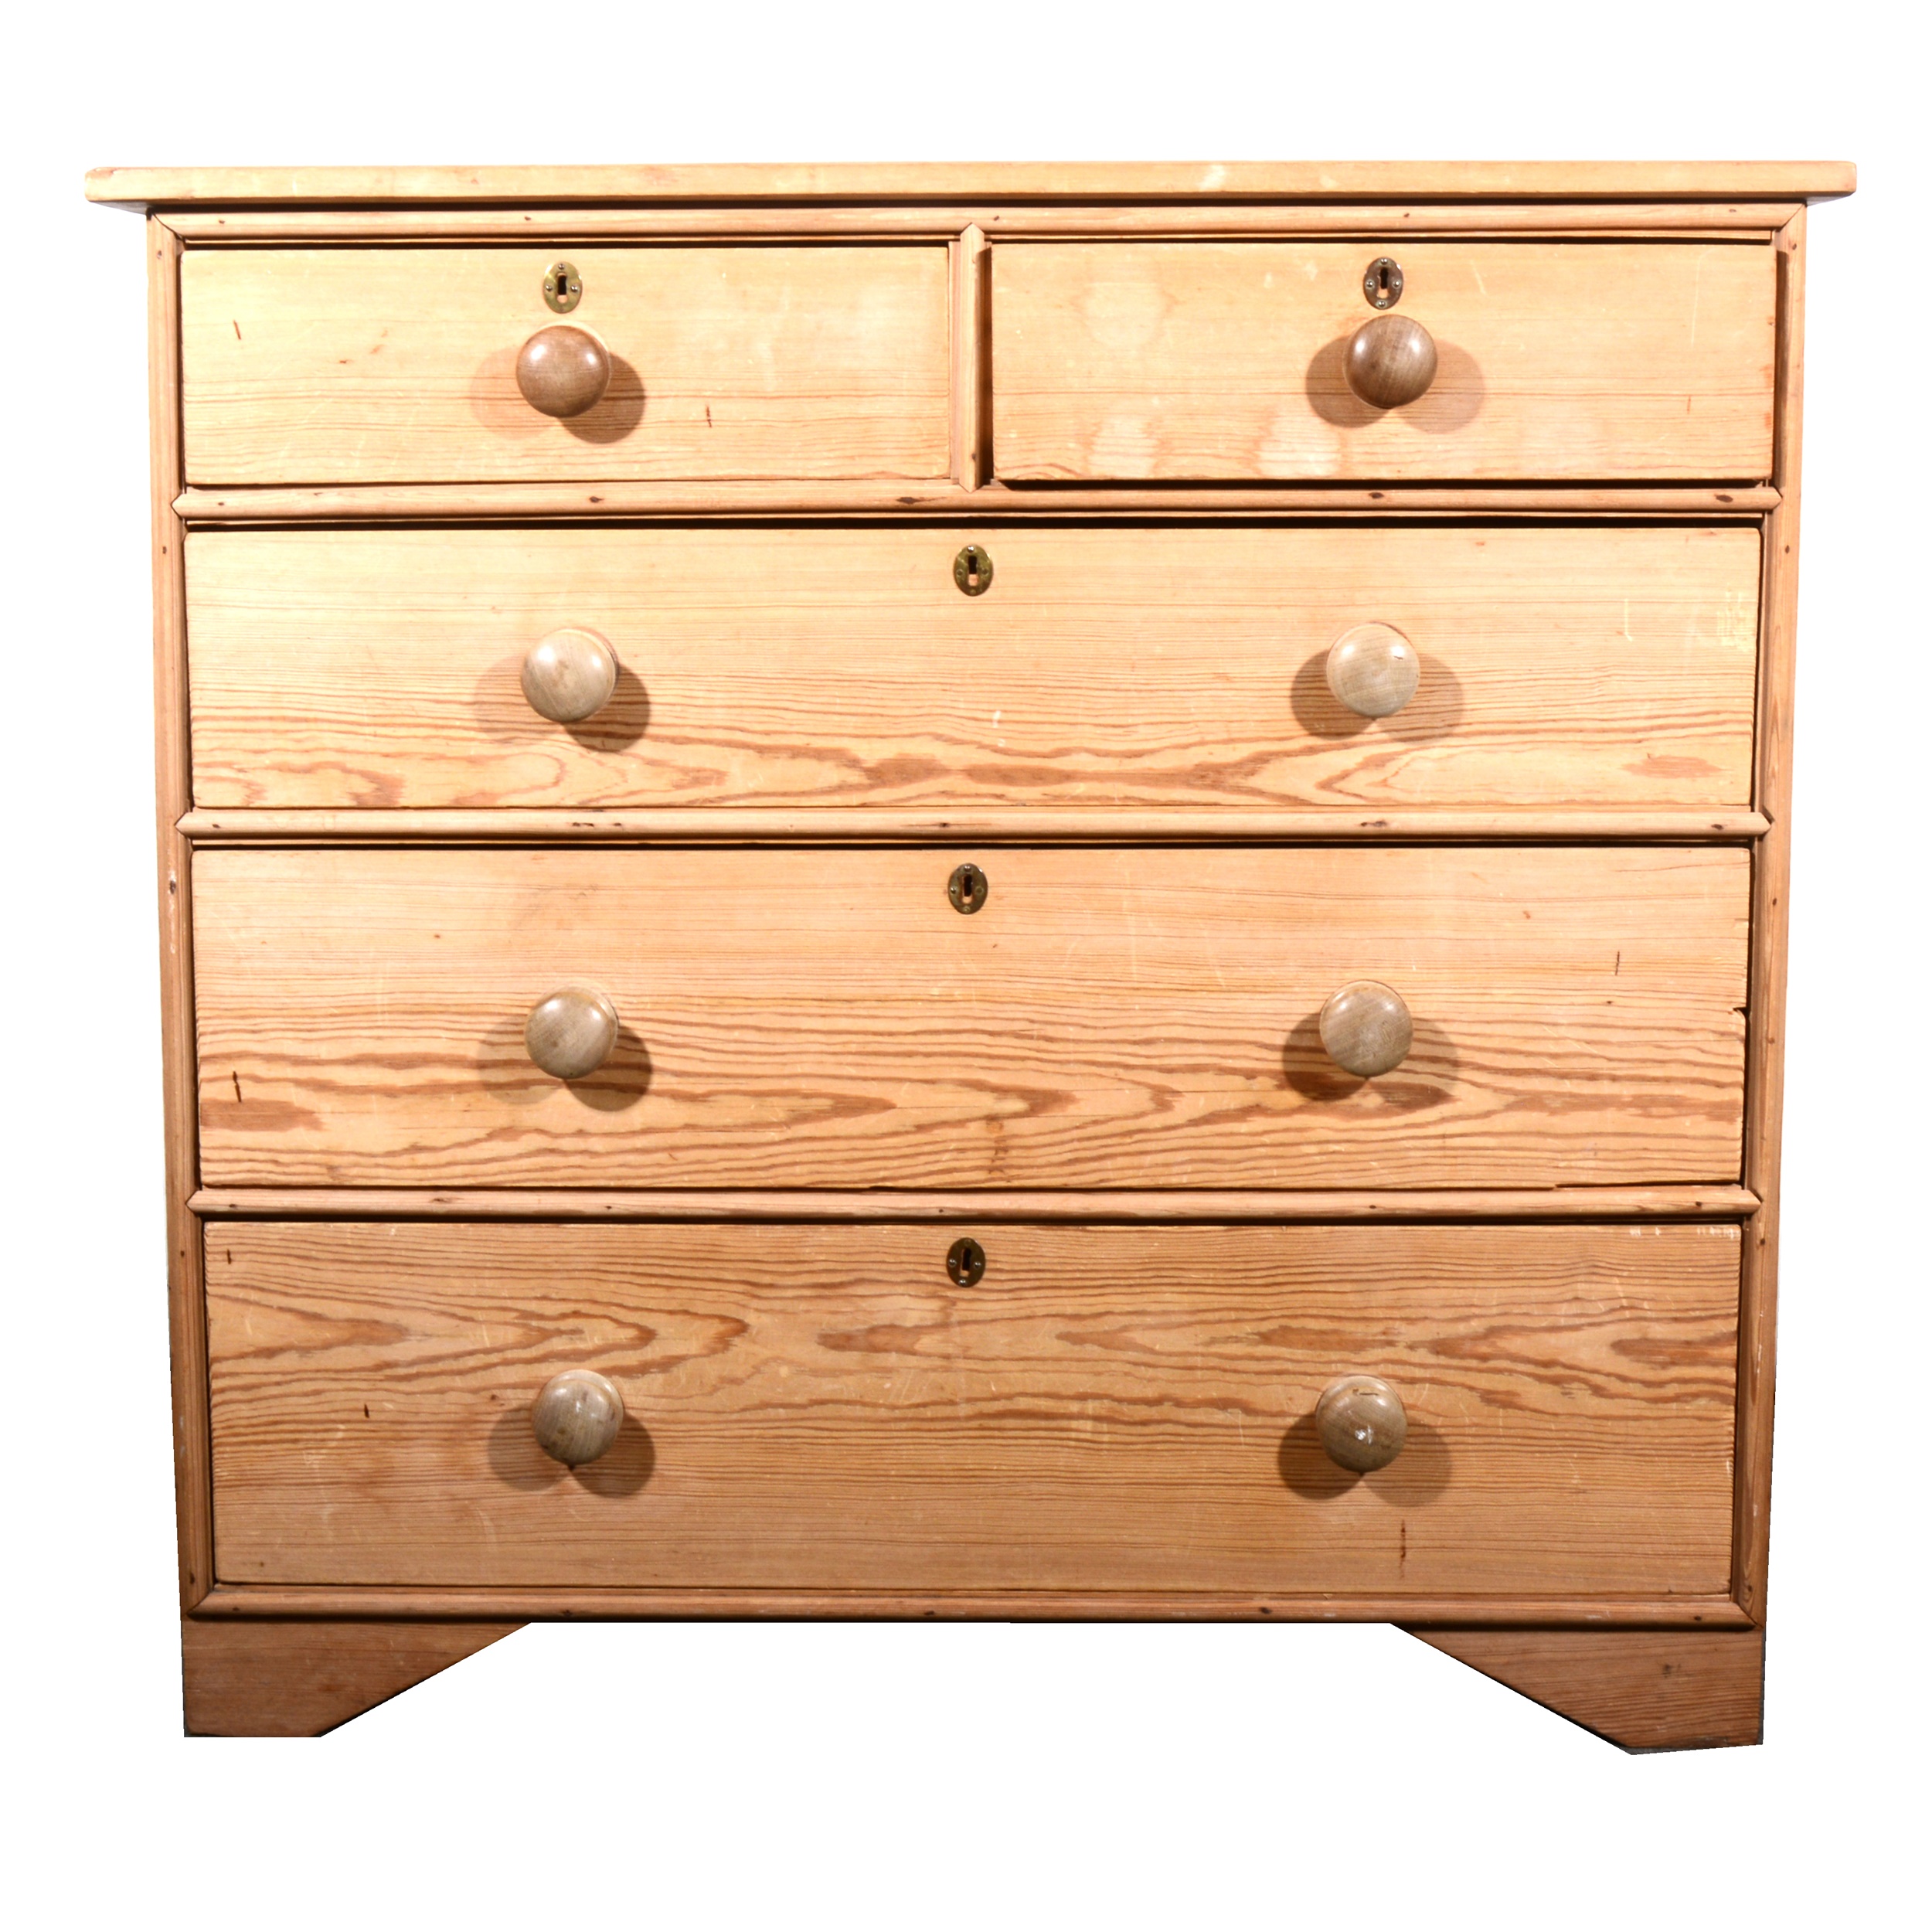 A stripped pine chest of drawers